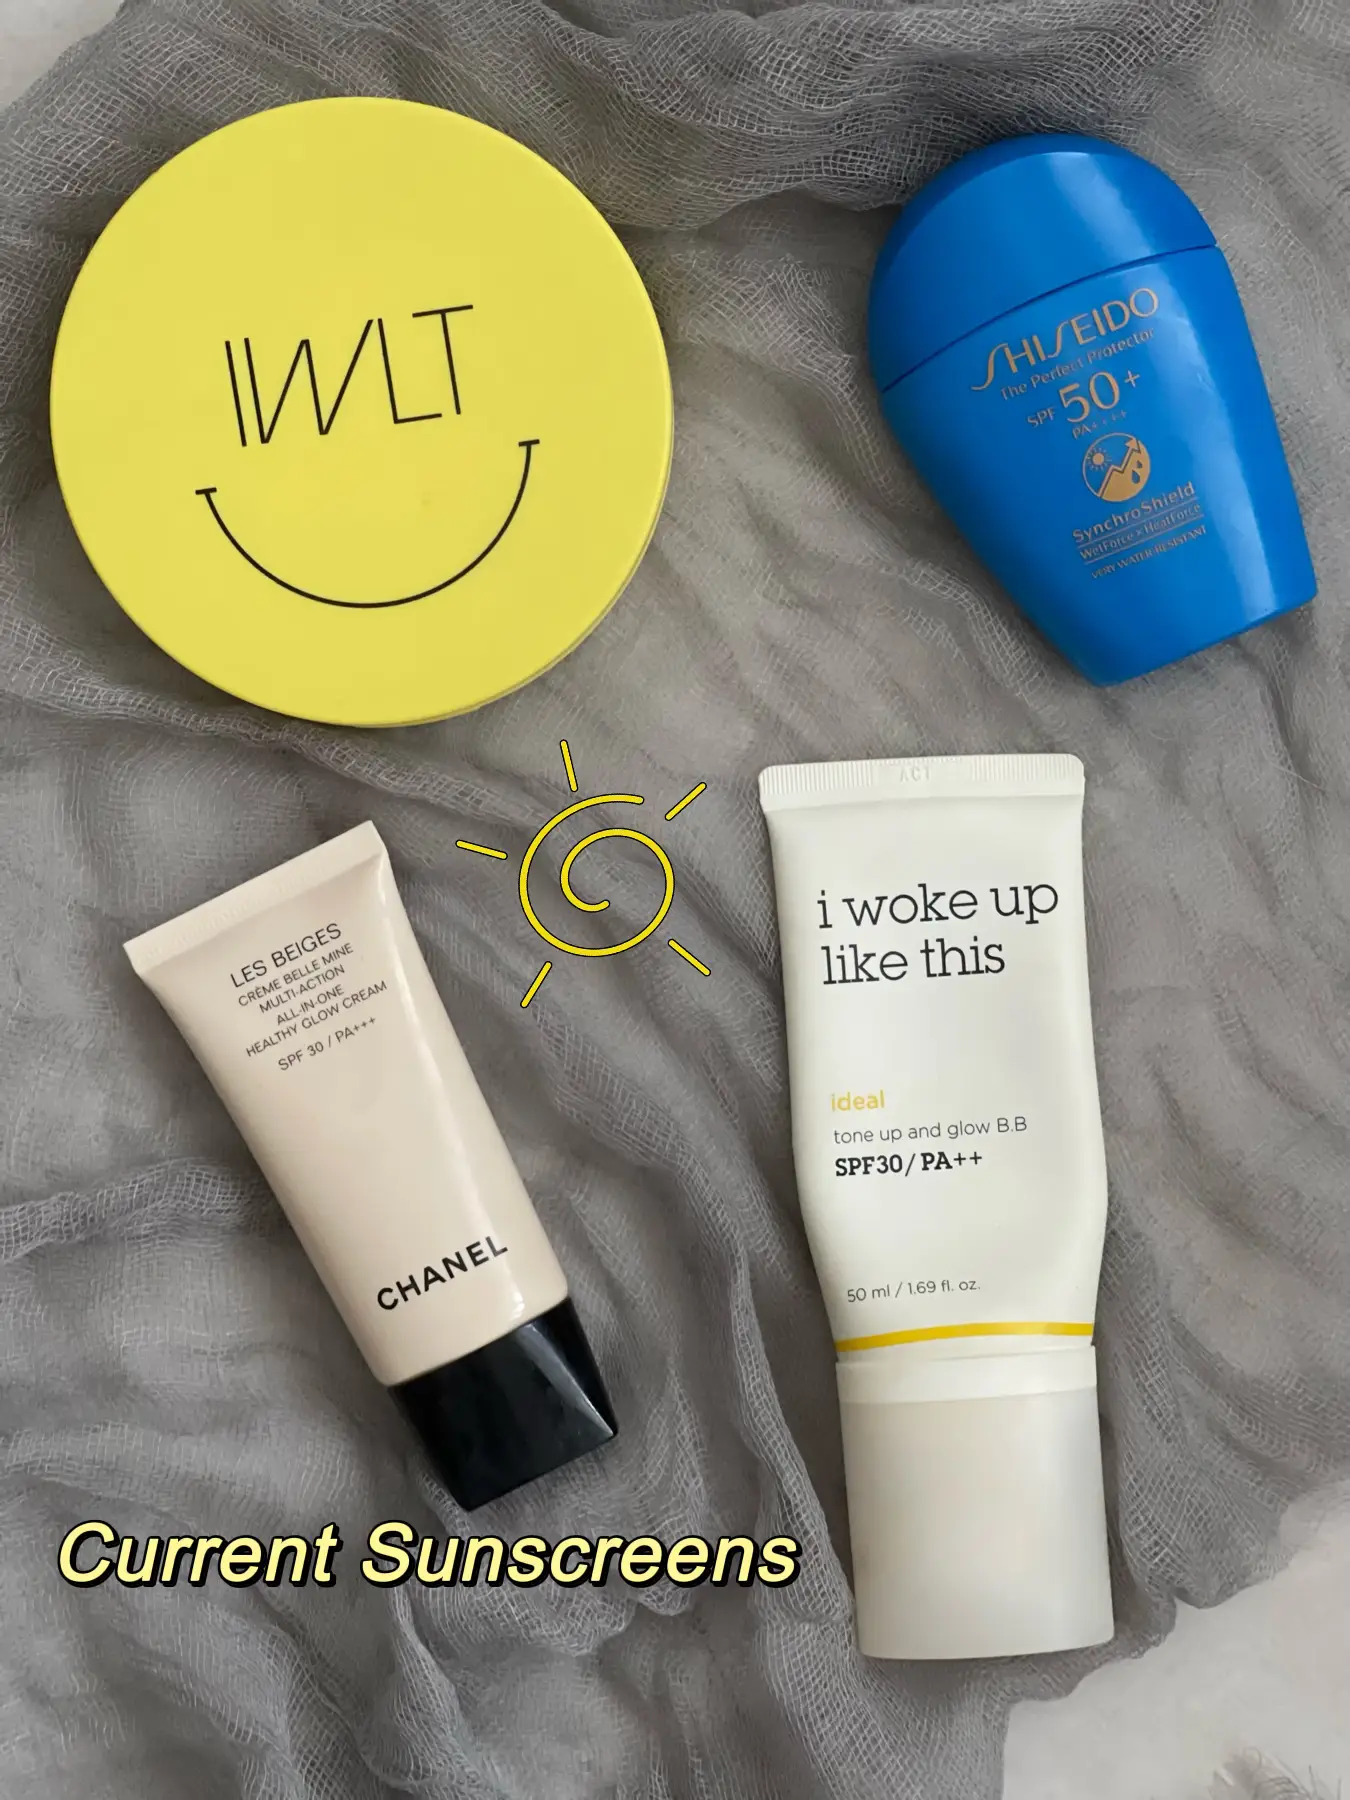 ☀️Protect your face from the harmful UV☀️